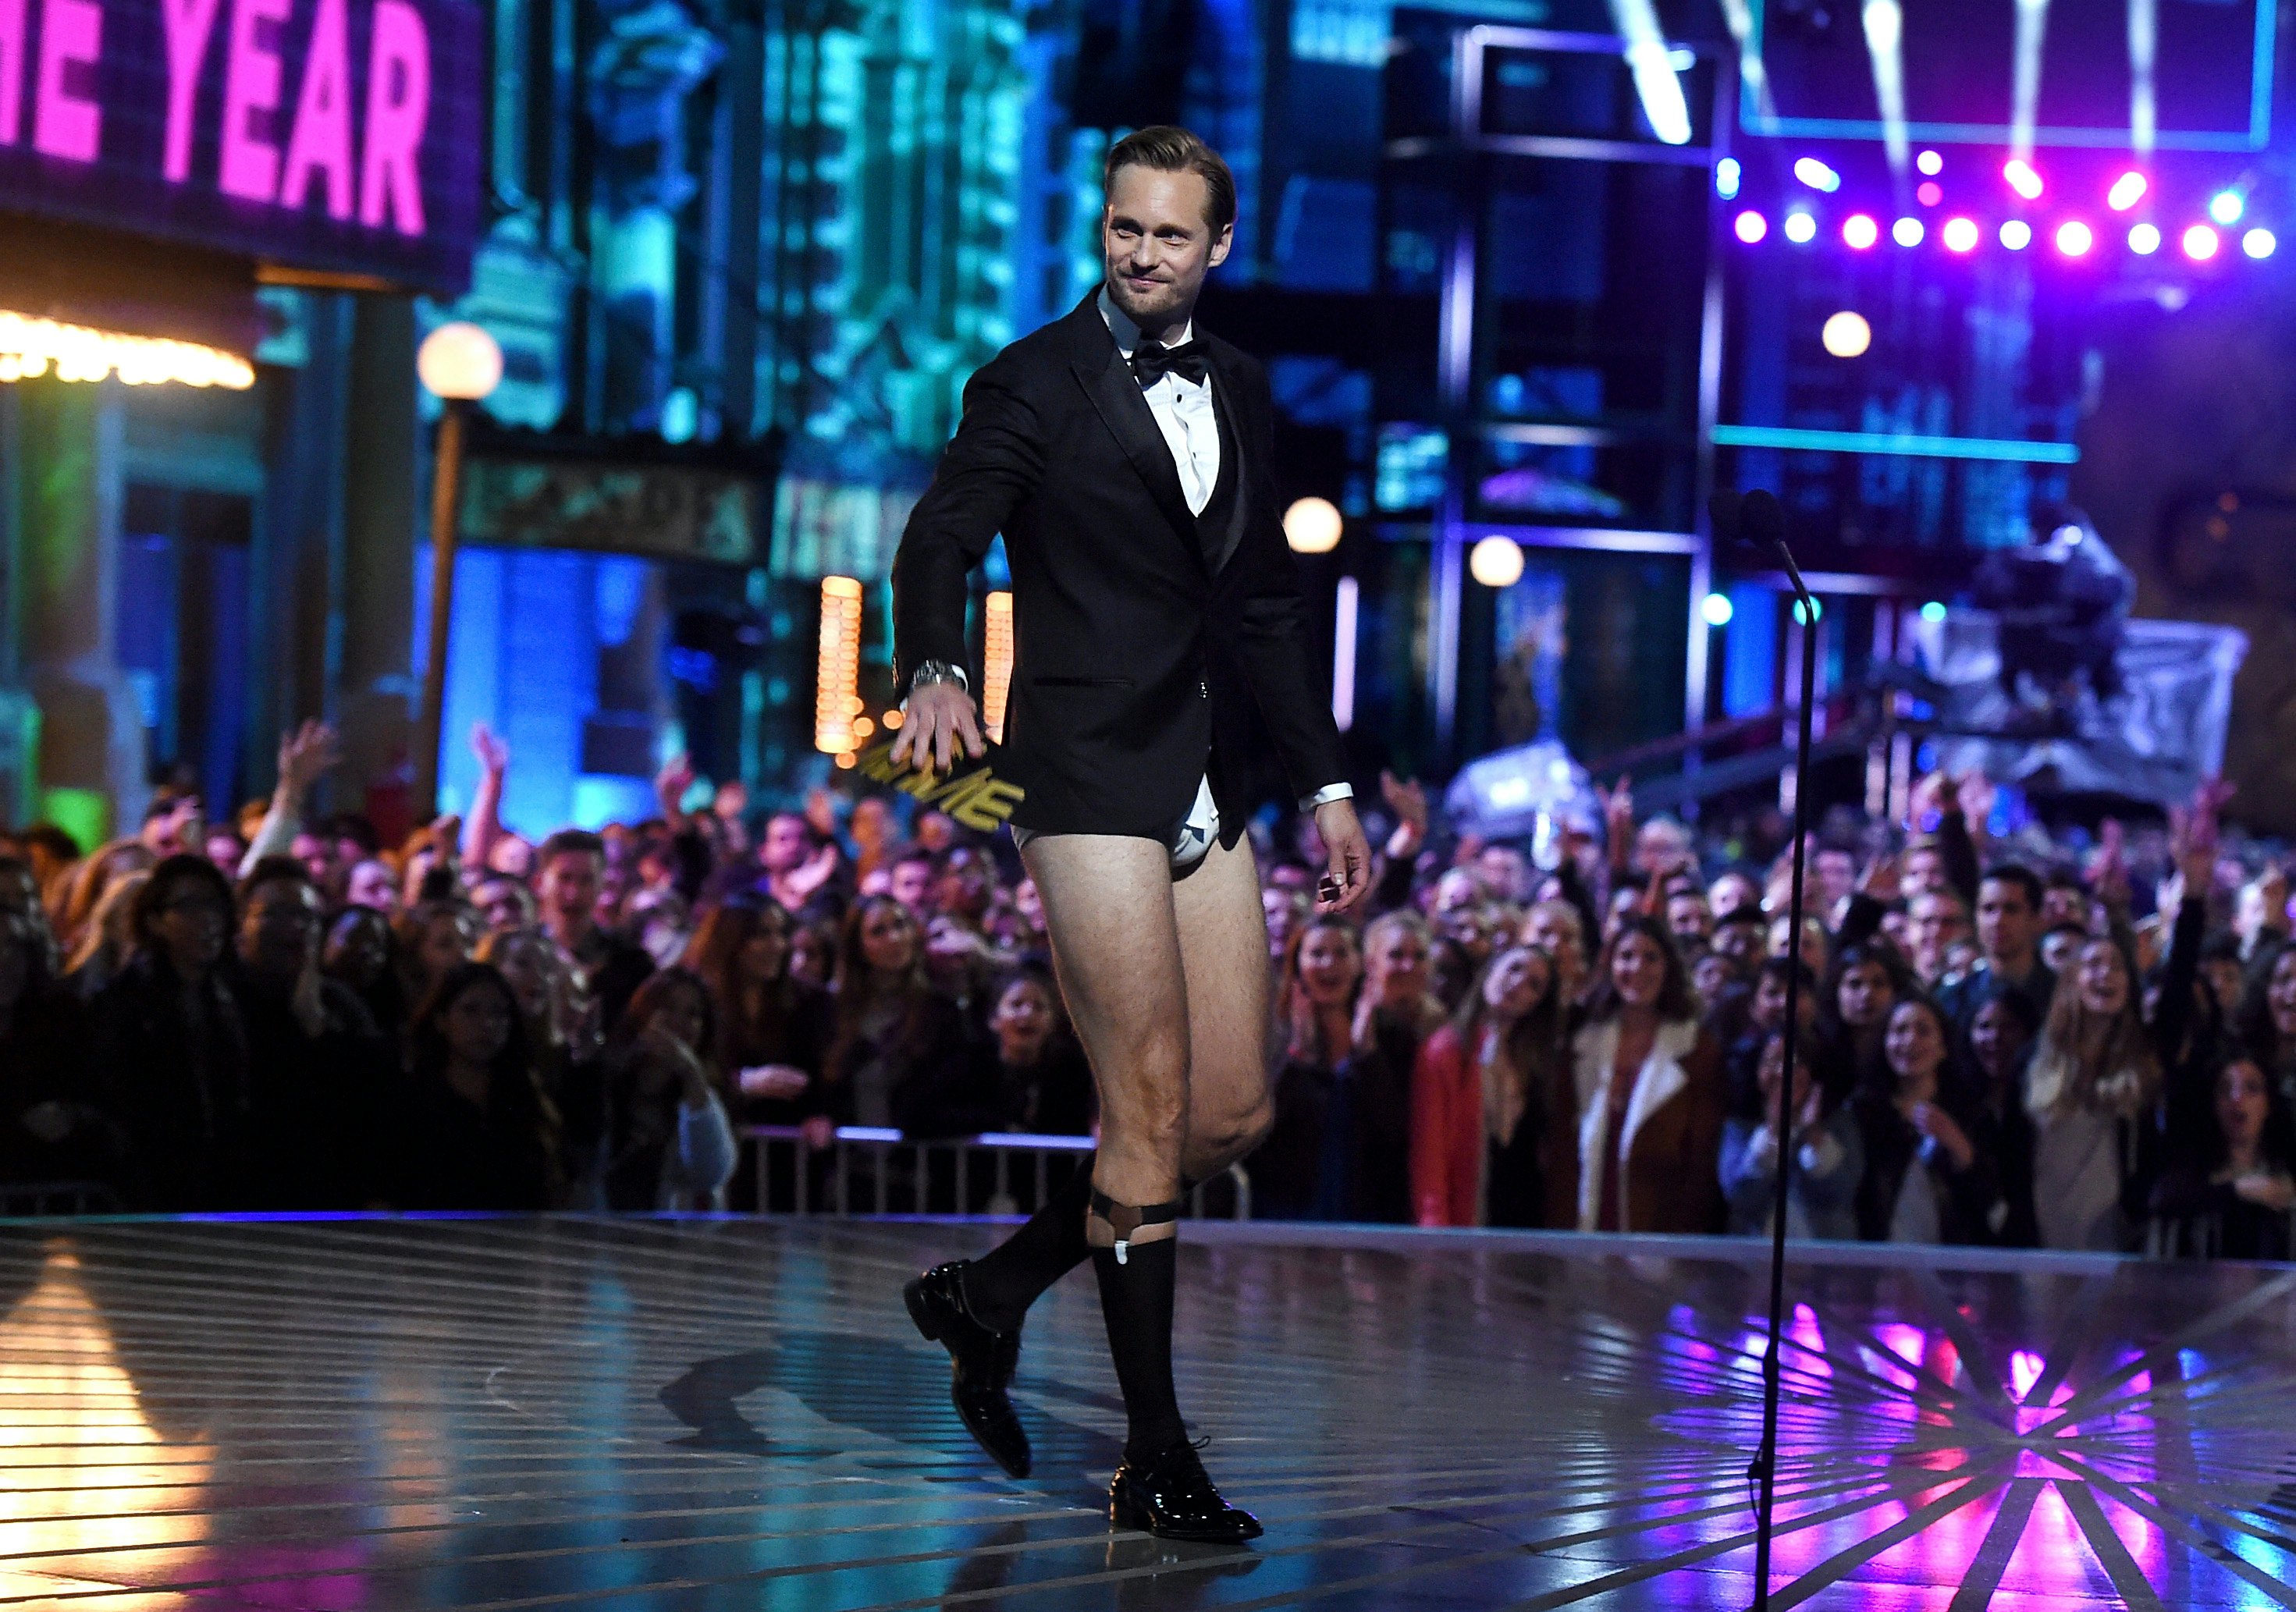 Are We Ready For Men's Version of the 'No Pants' Trend?